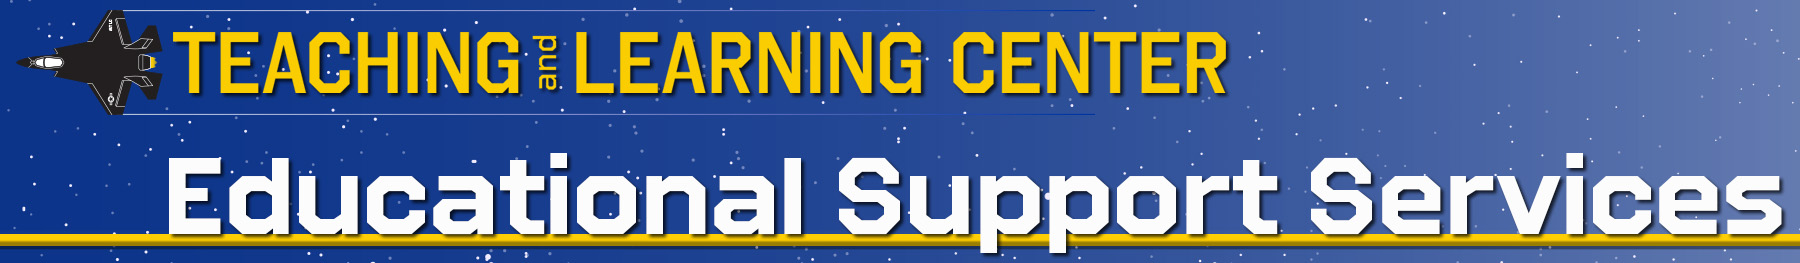 AU Teaching and Learning Center Educational Support Services banner